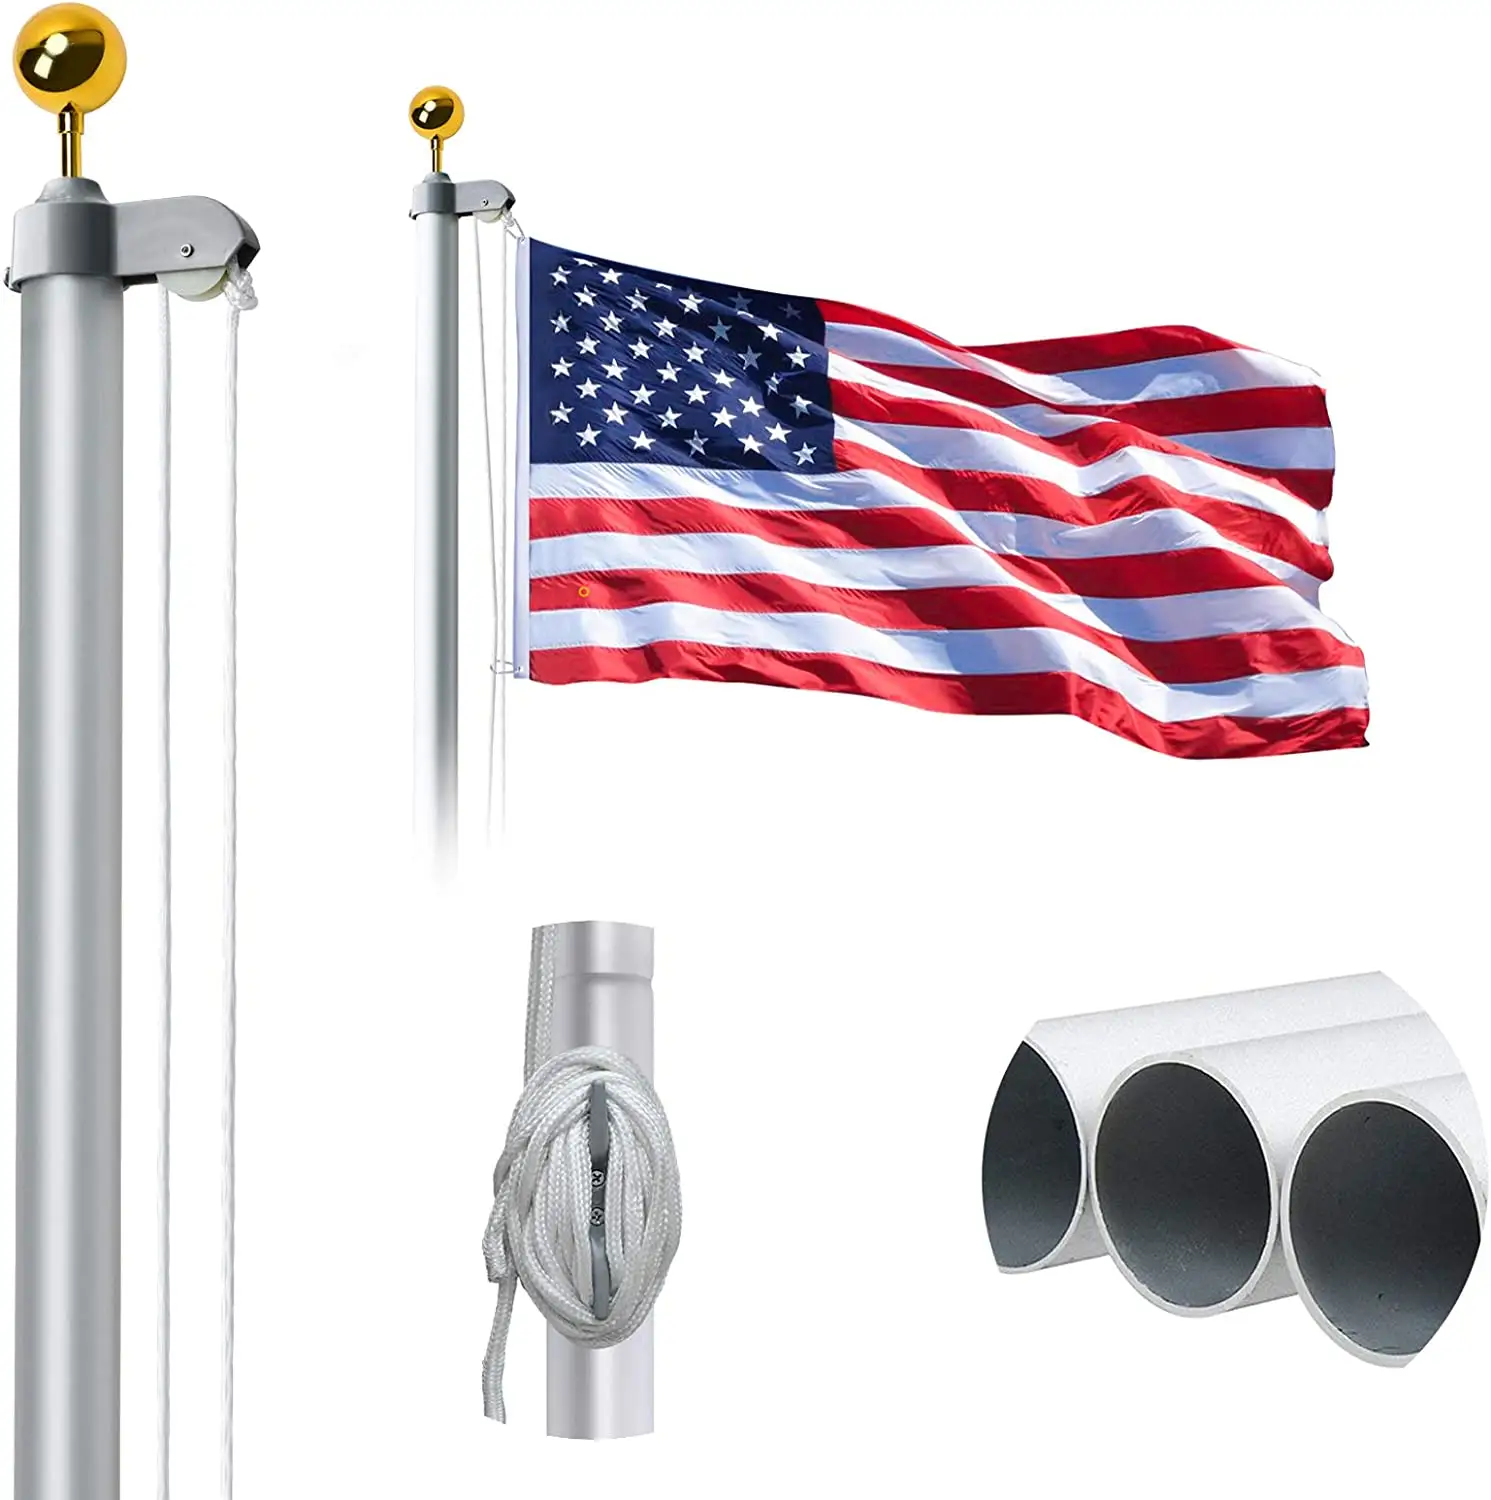 25FT Sectional Flag Pole Kit  Extra Thick Heavy Duty Aluminum Outdoor In ground Flagpole